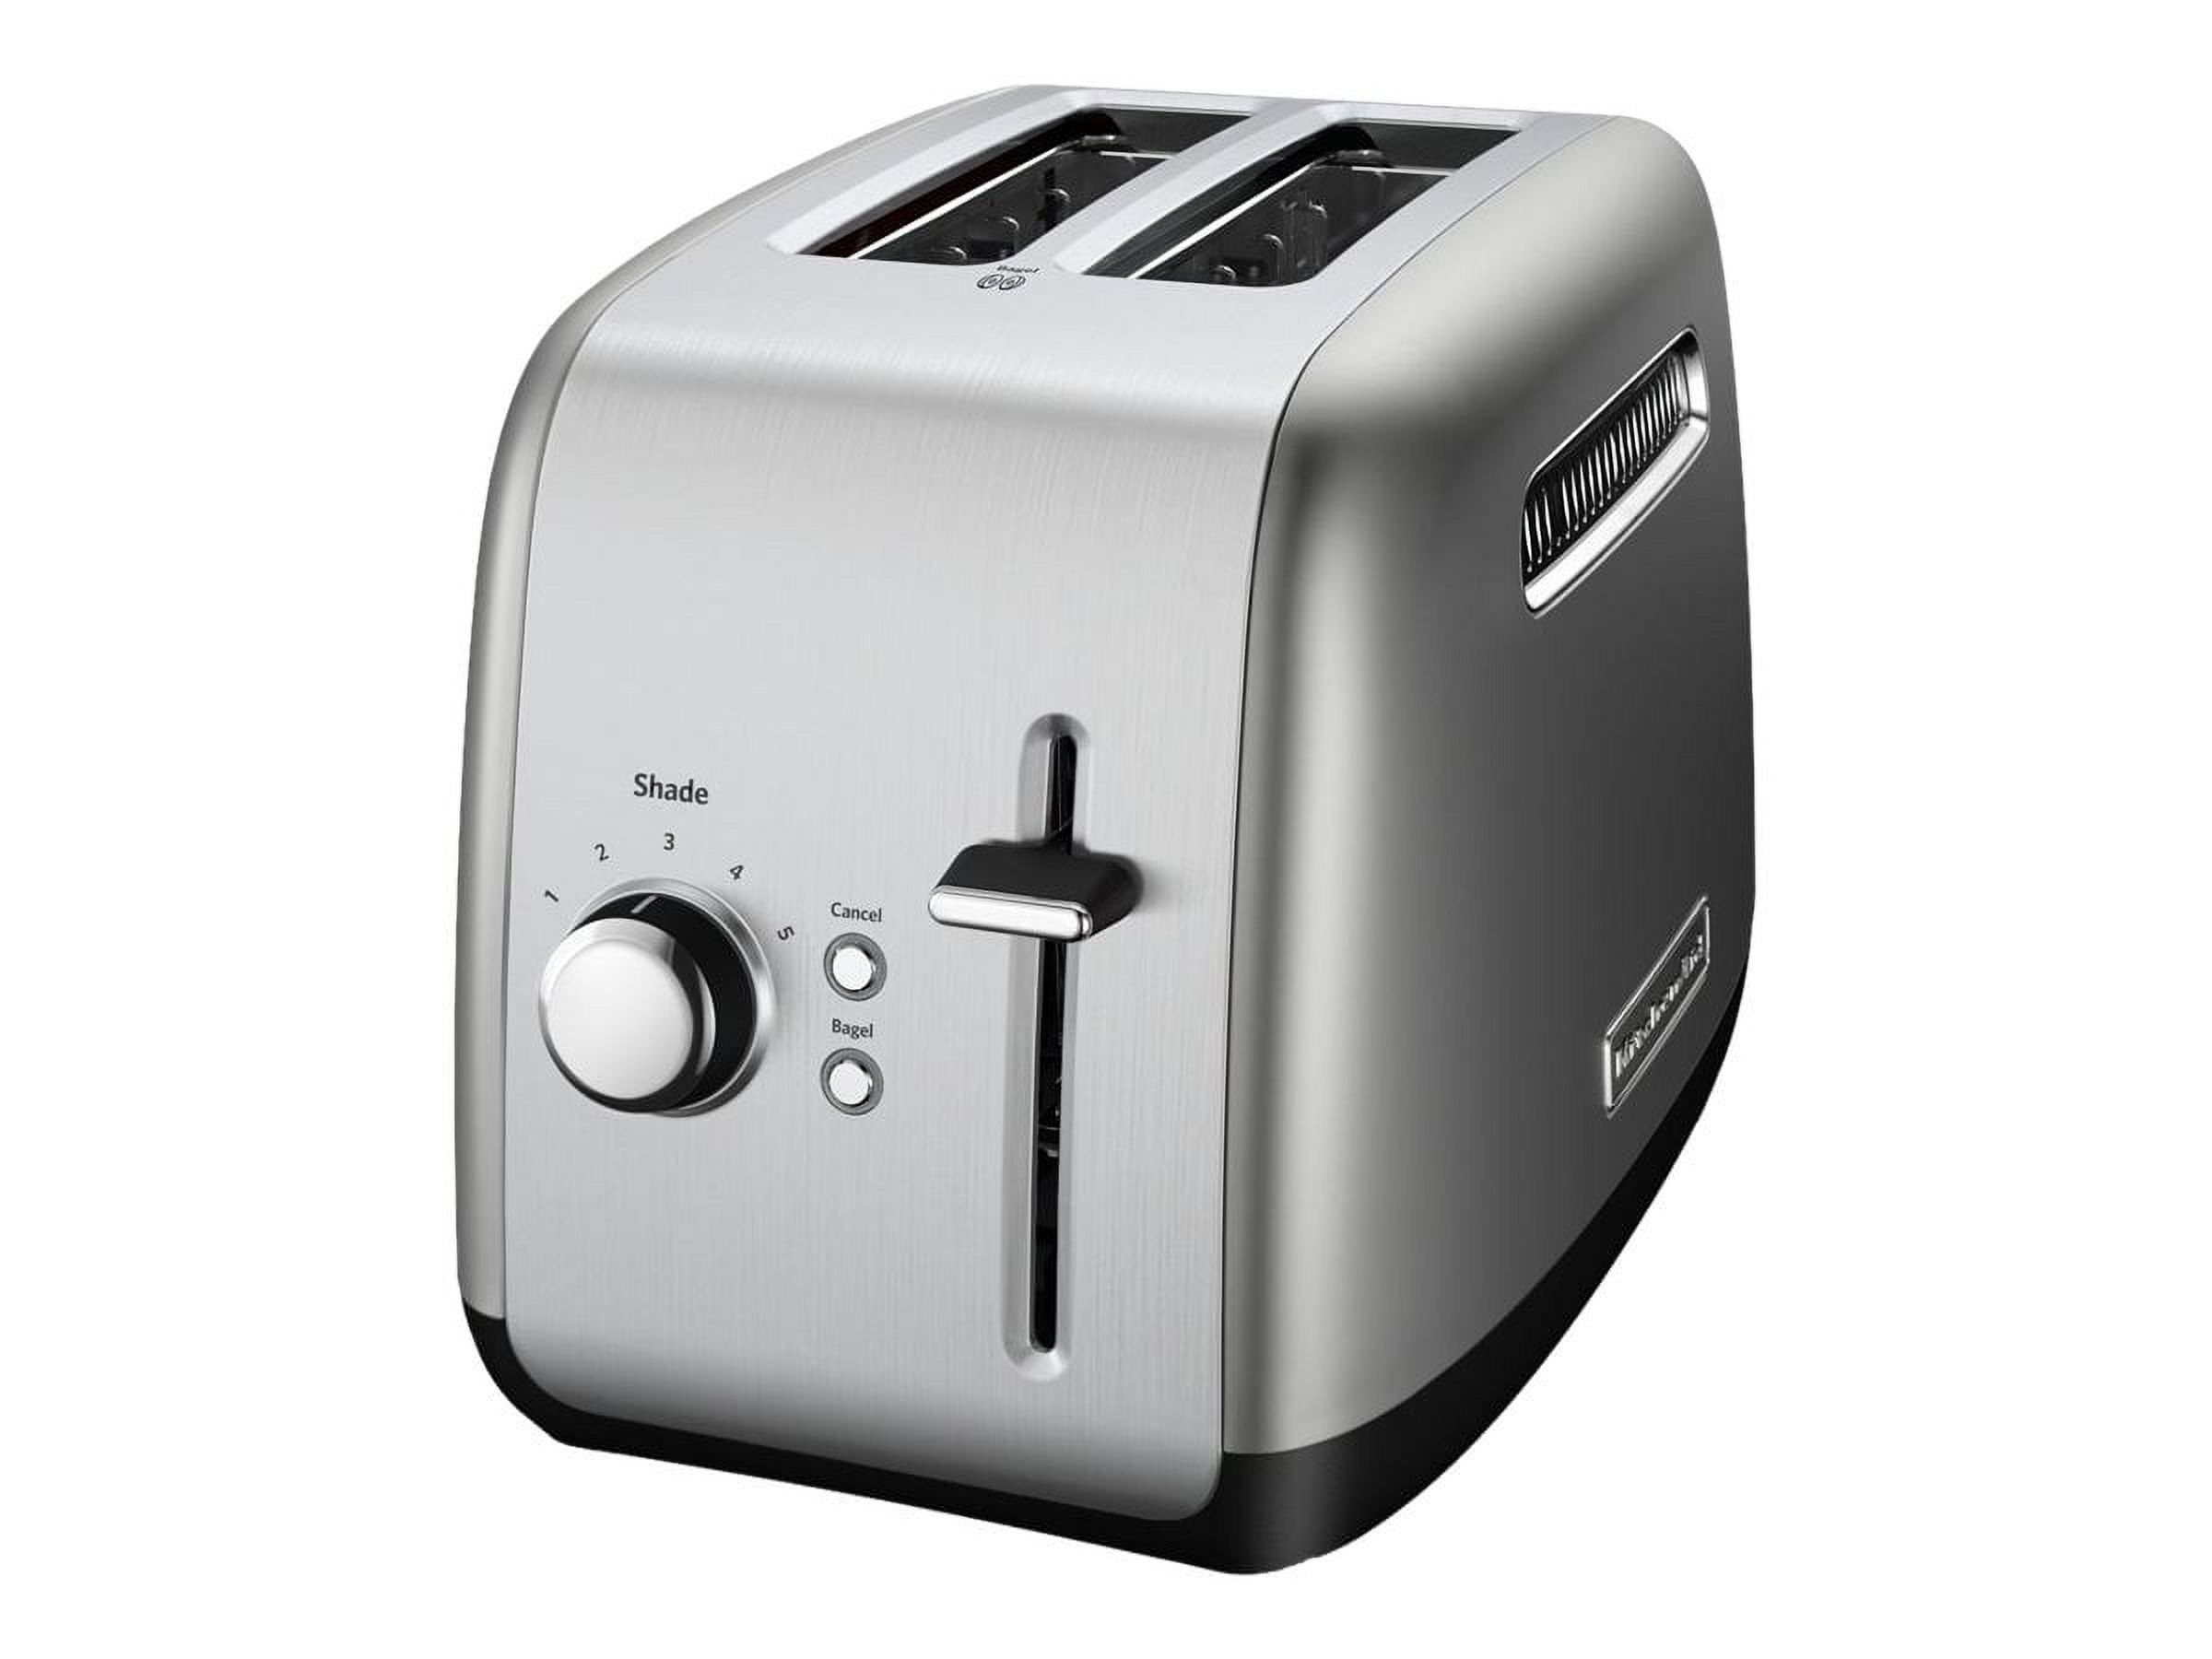 KitchenAid 2-Slice Toaster with Manual Lift Lever, Contour Silver, KMT2115 - image 5 of 9